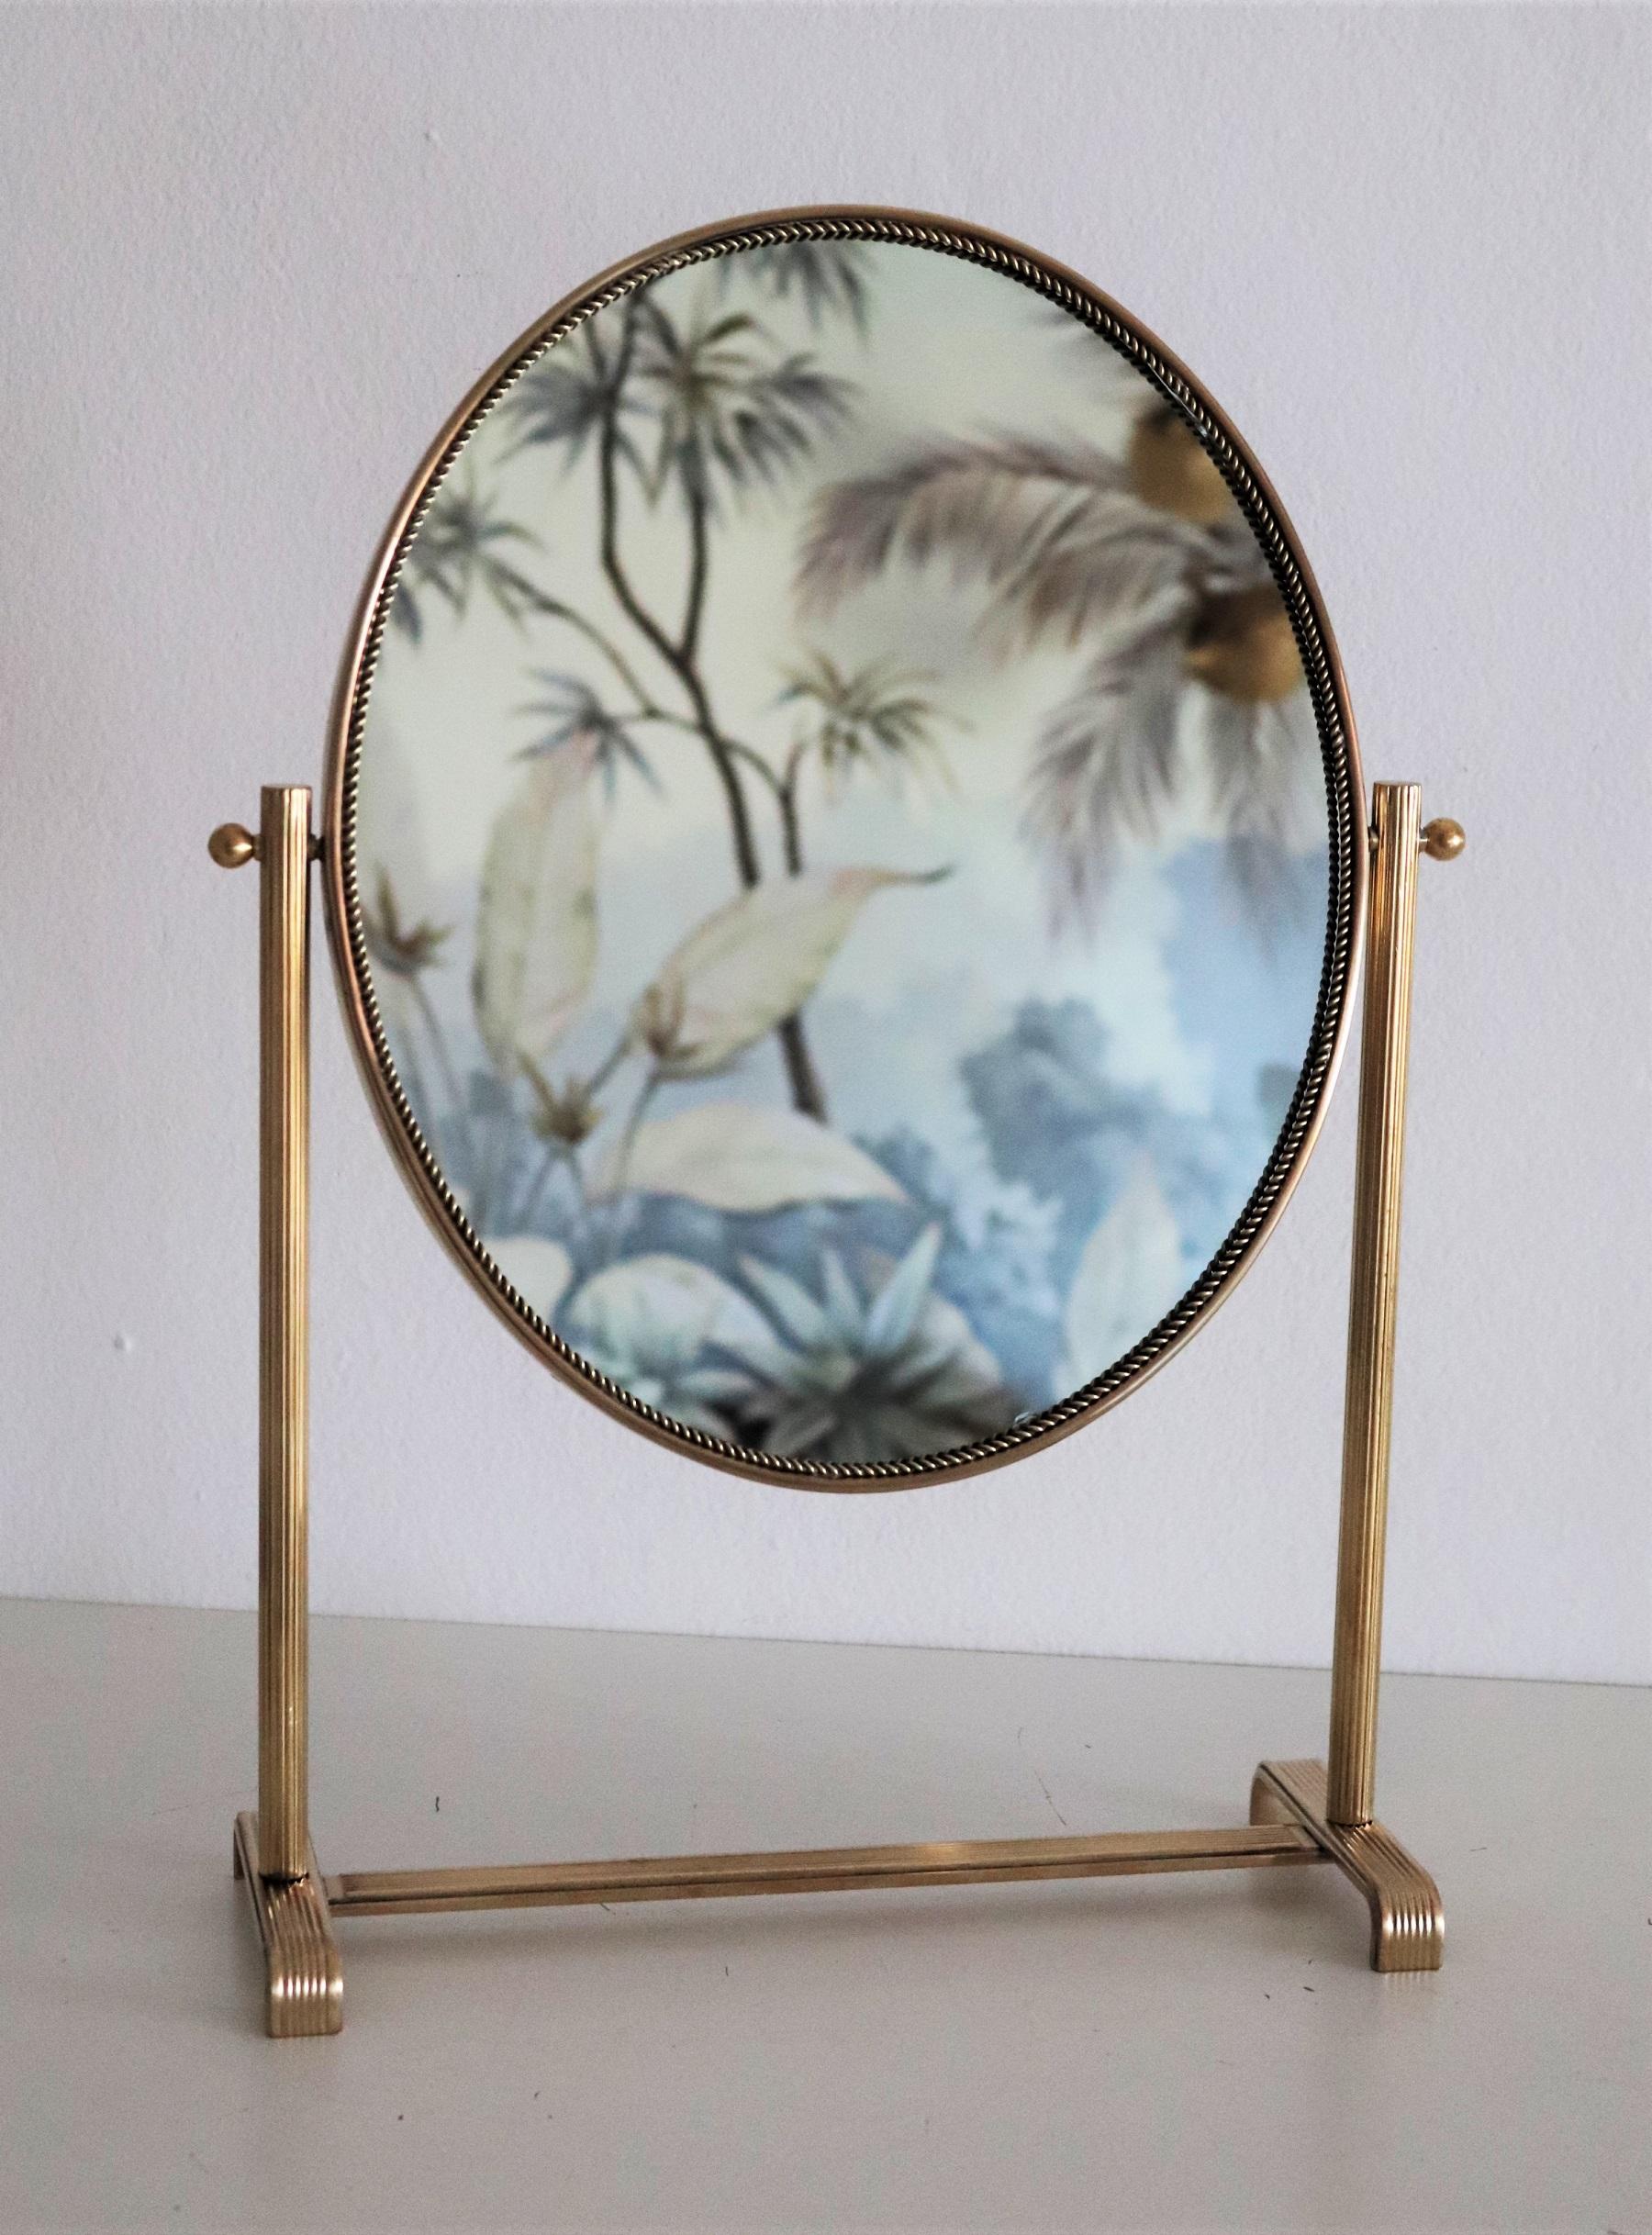 Gorgeous table or vanity mirror with full brass frame and base.
Made in Italy in the 1950s.
The round frame has decorative details also in brass.
The mirror can be turned around at 360° ; the backplate is made of dark wood.
The mirror glass is